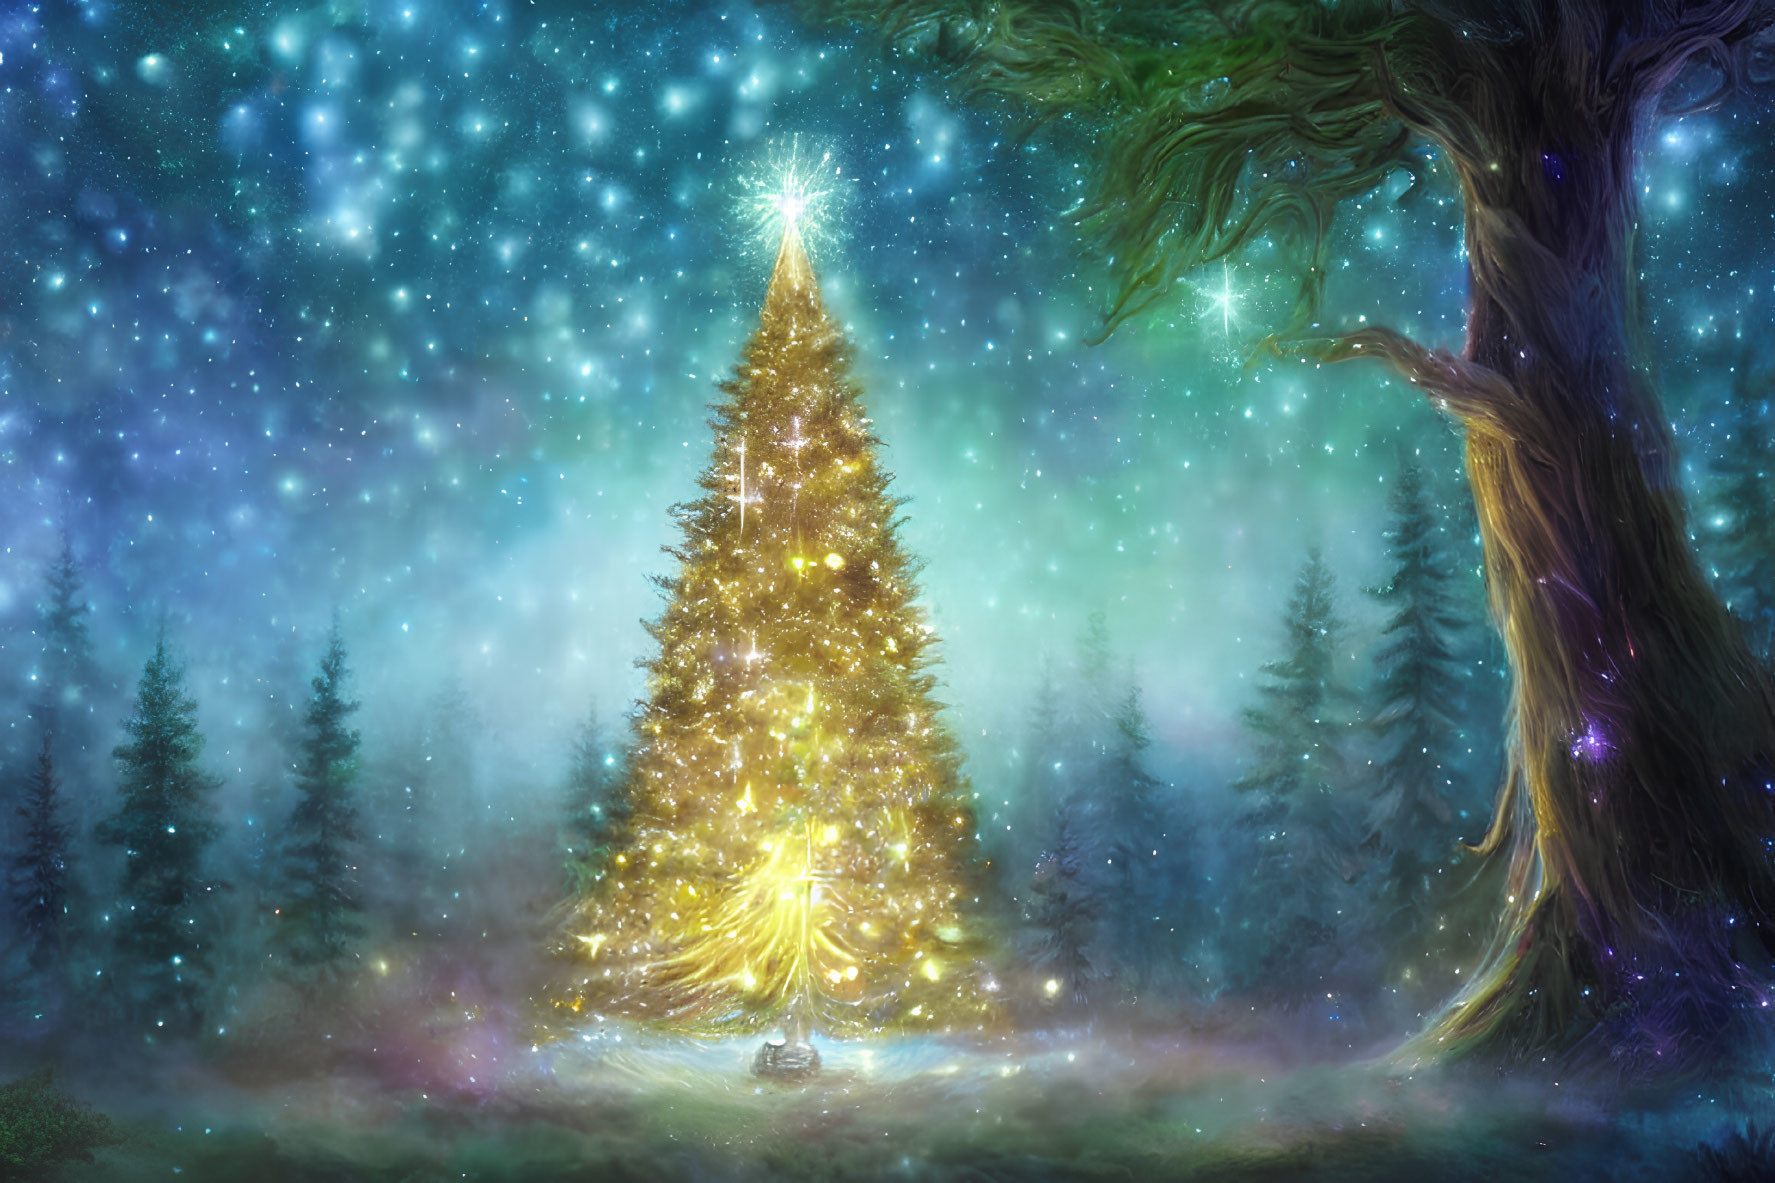 Radiant Christmas tree in magical forest under starry night sky